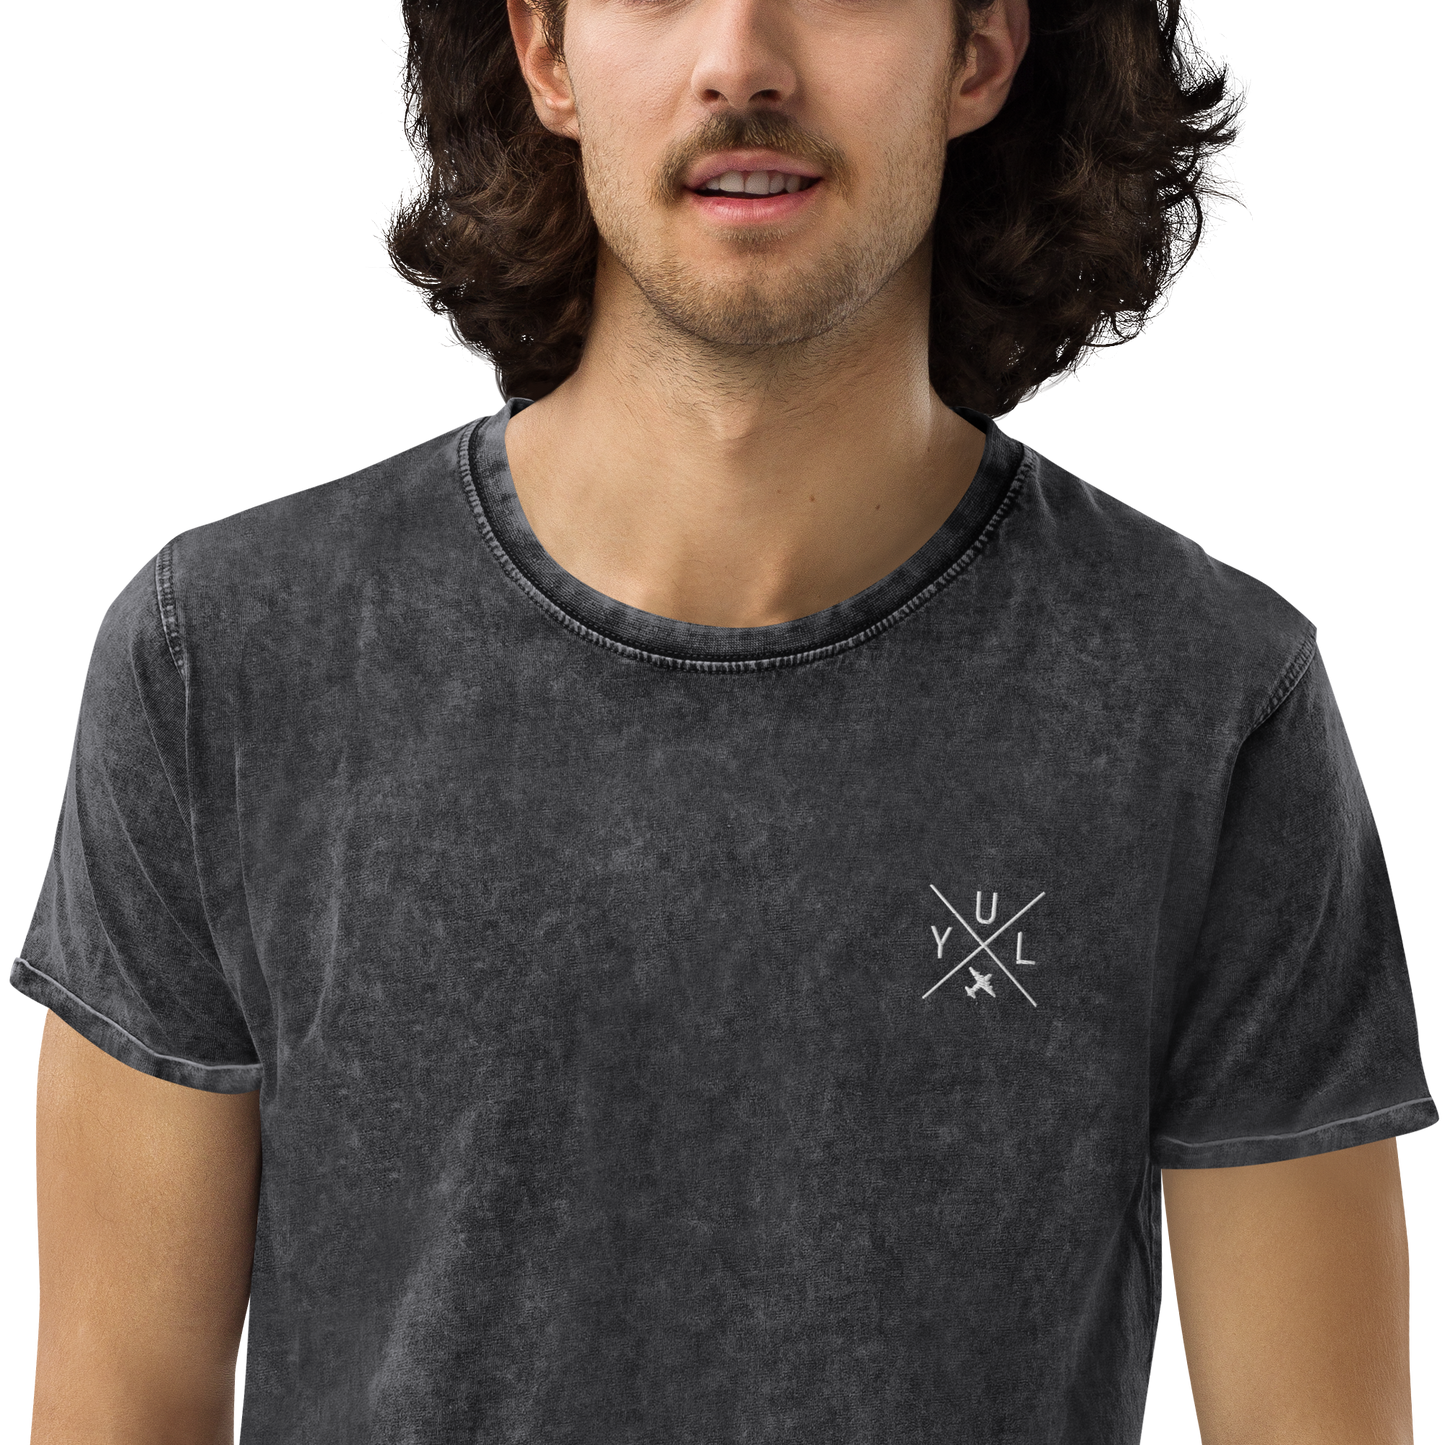 YHM Designs - YUL Montreal Denim T-Shirt - Crossed-X Design with Airport Code and Vintage Propliner - White Embroidery - Image 07